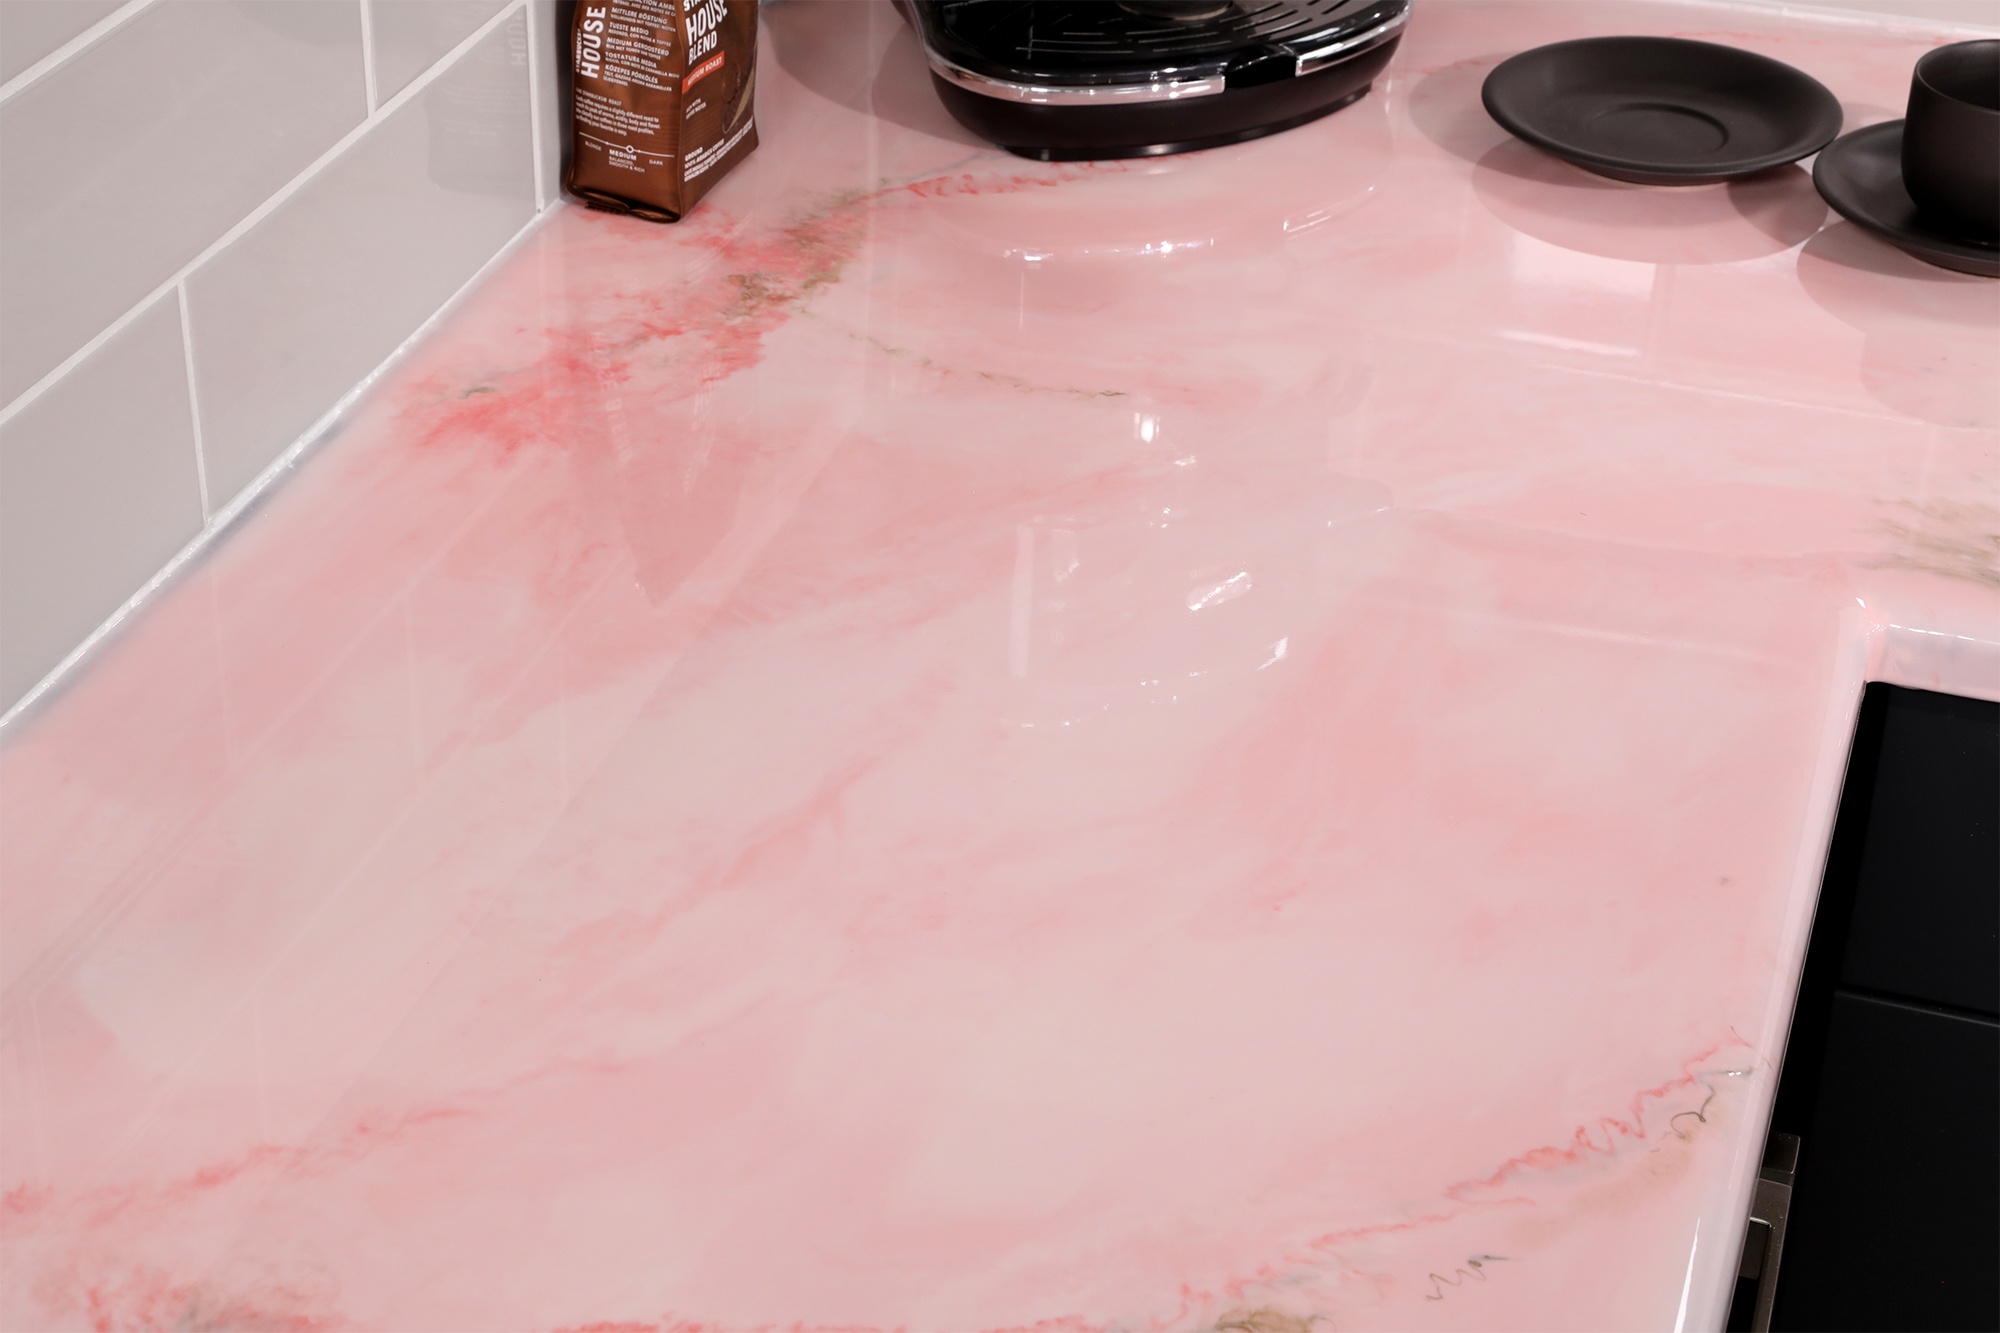 pink marble countertops